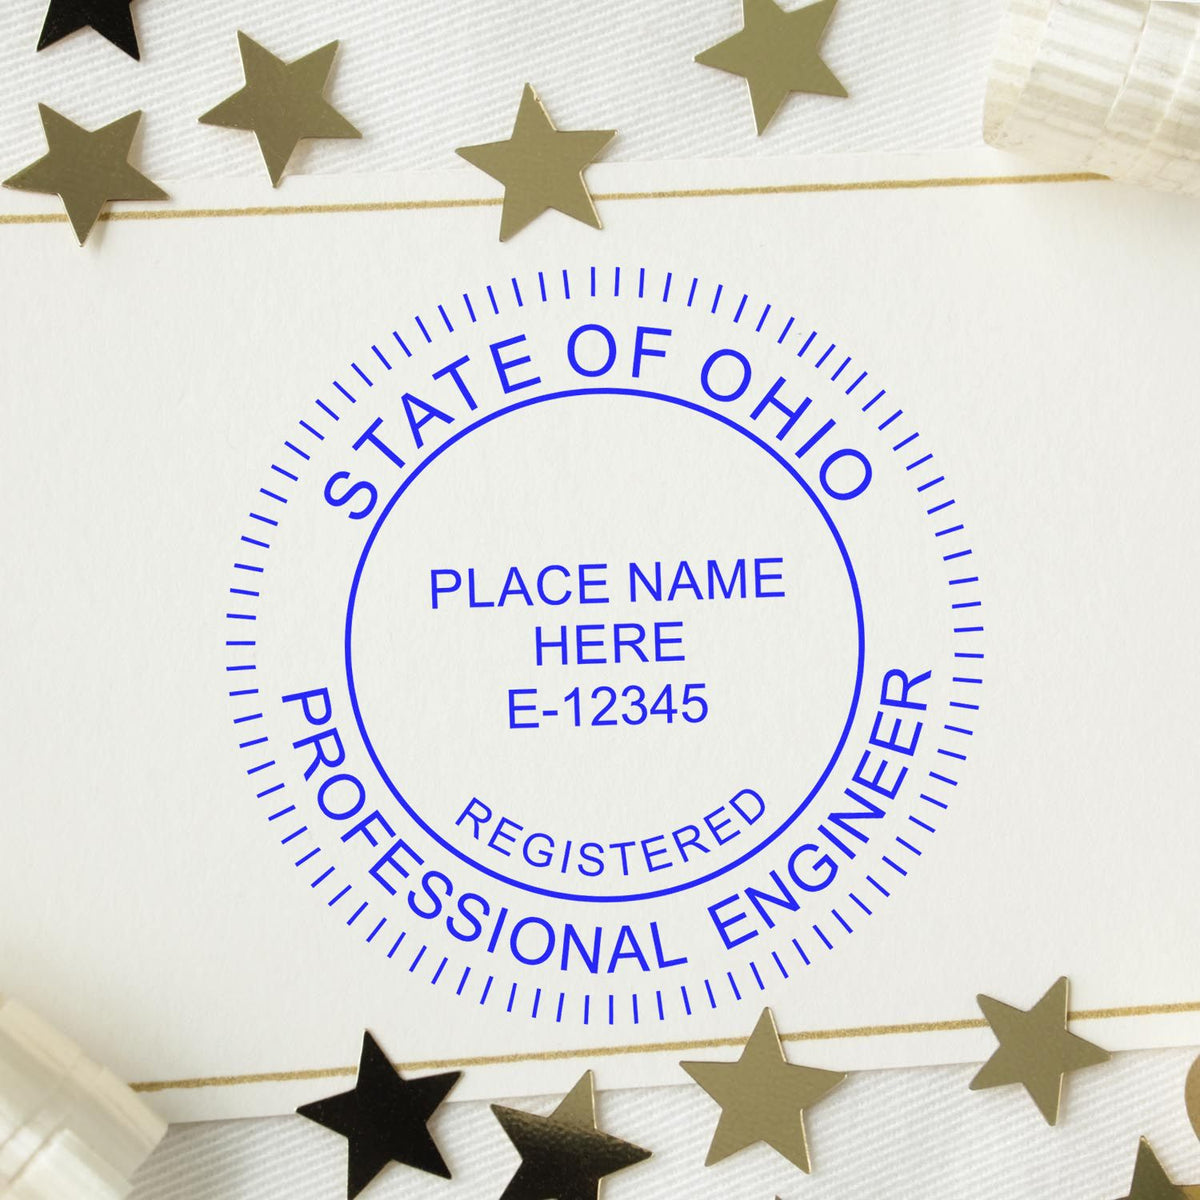 An alternative view of the Ohio Professional Engineer Seal Stamp stamped on a sheet of paper showing the image in use